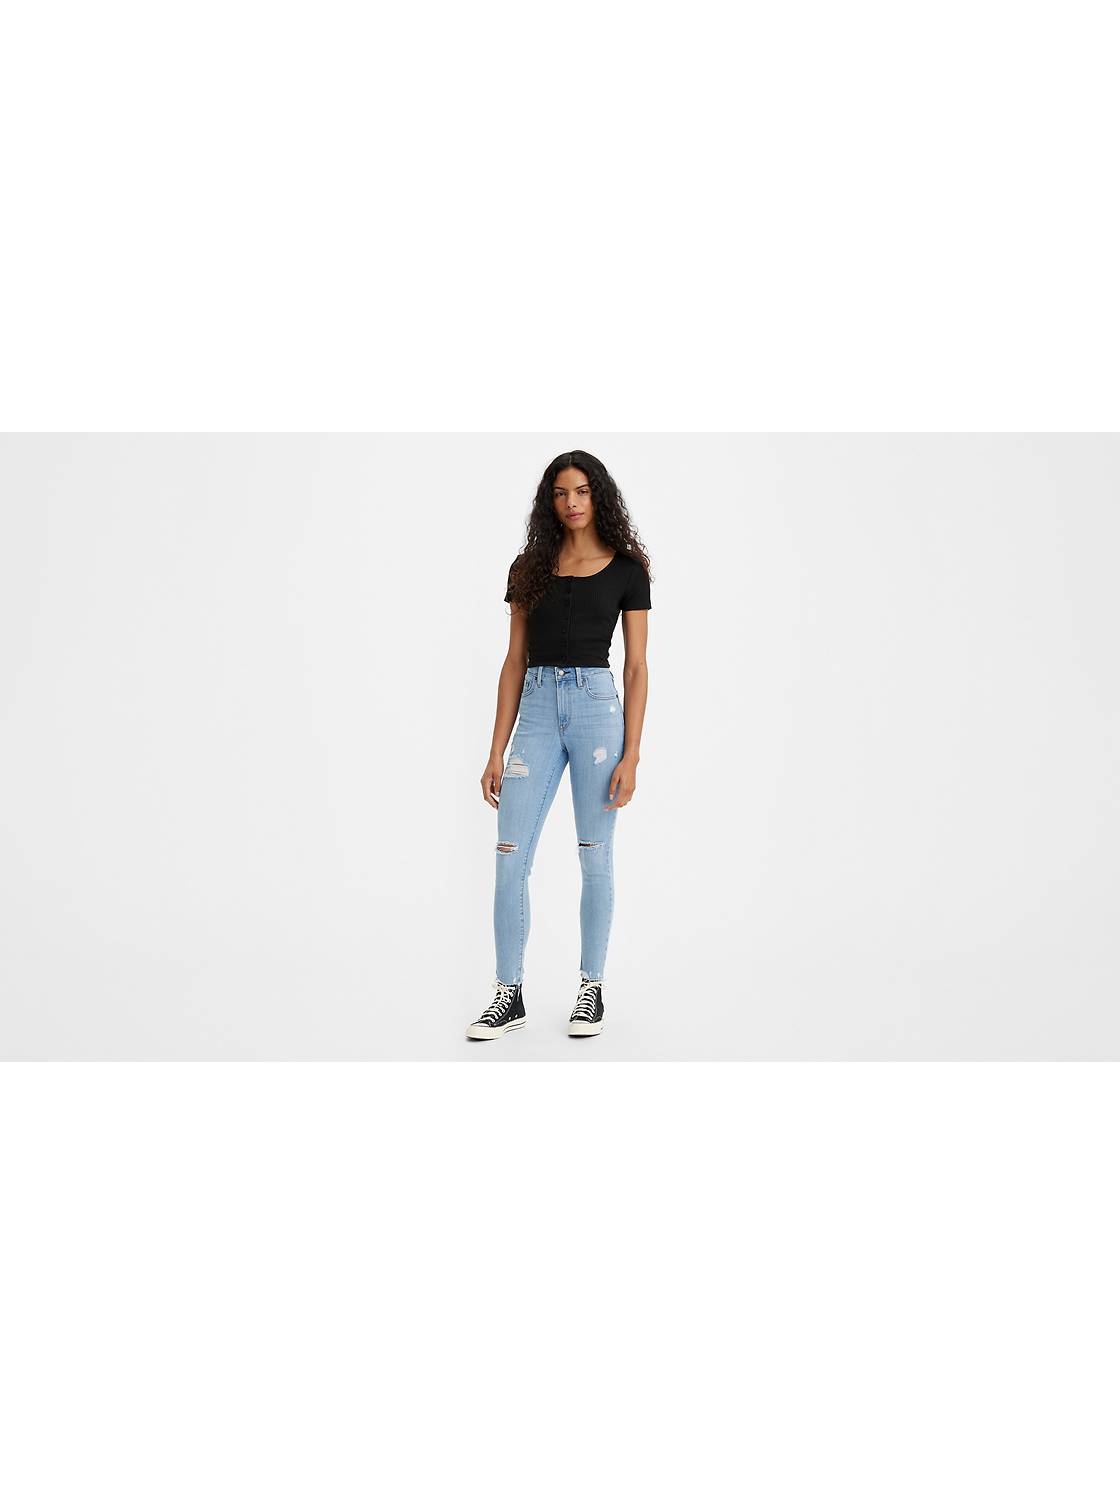 High-Waisted Jeans - Women's High-Rise Jeans & Pants | Levi’s® US